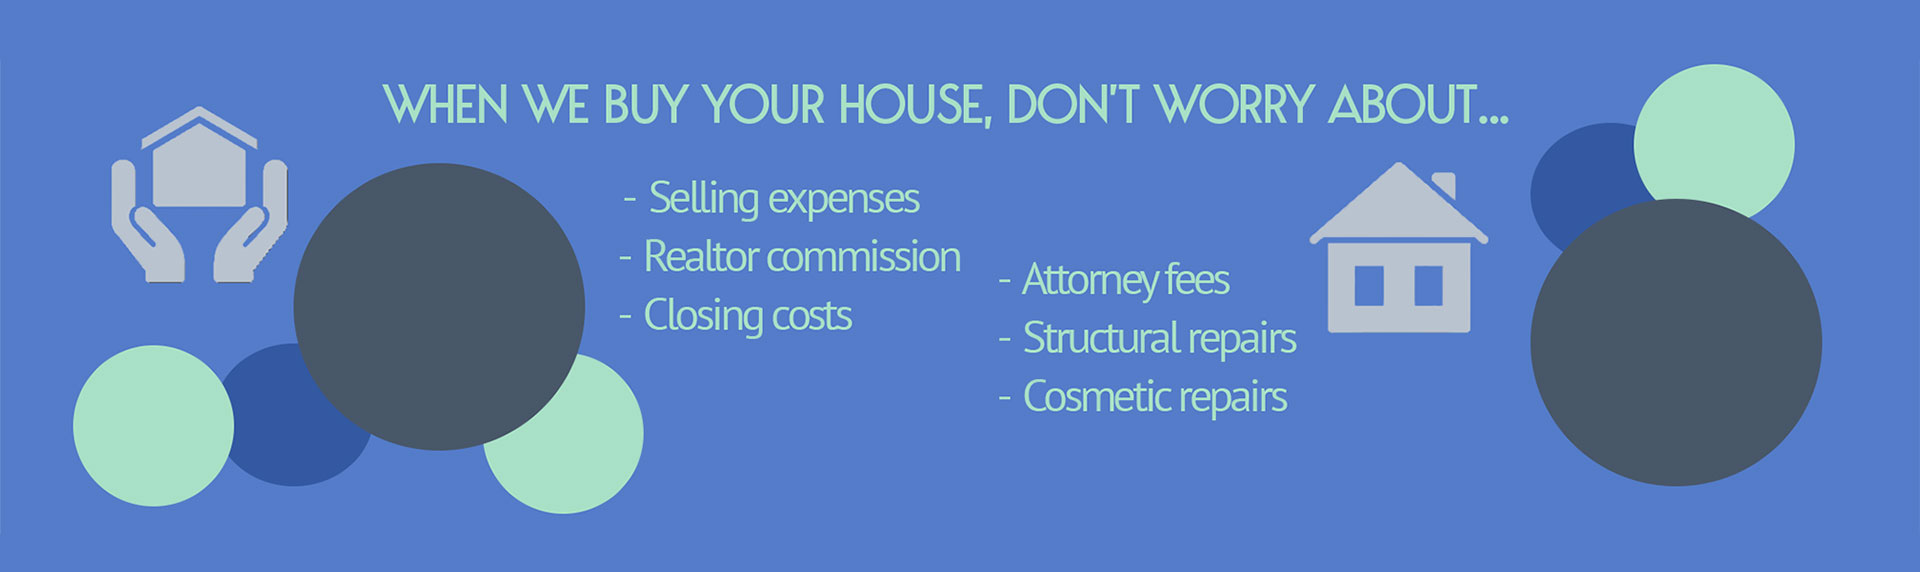 When we buy your house, don't worry about...